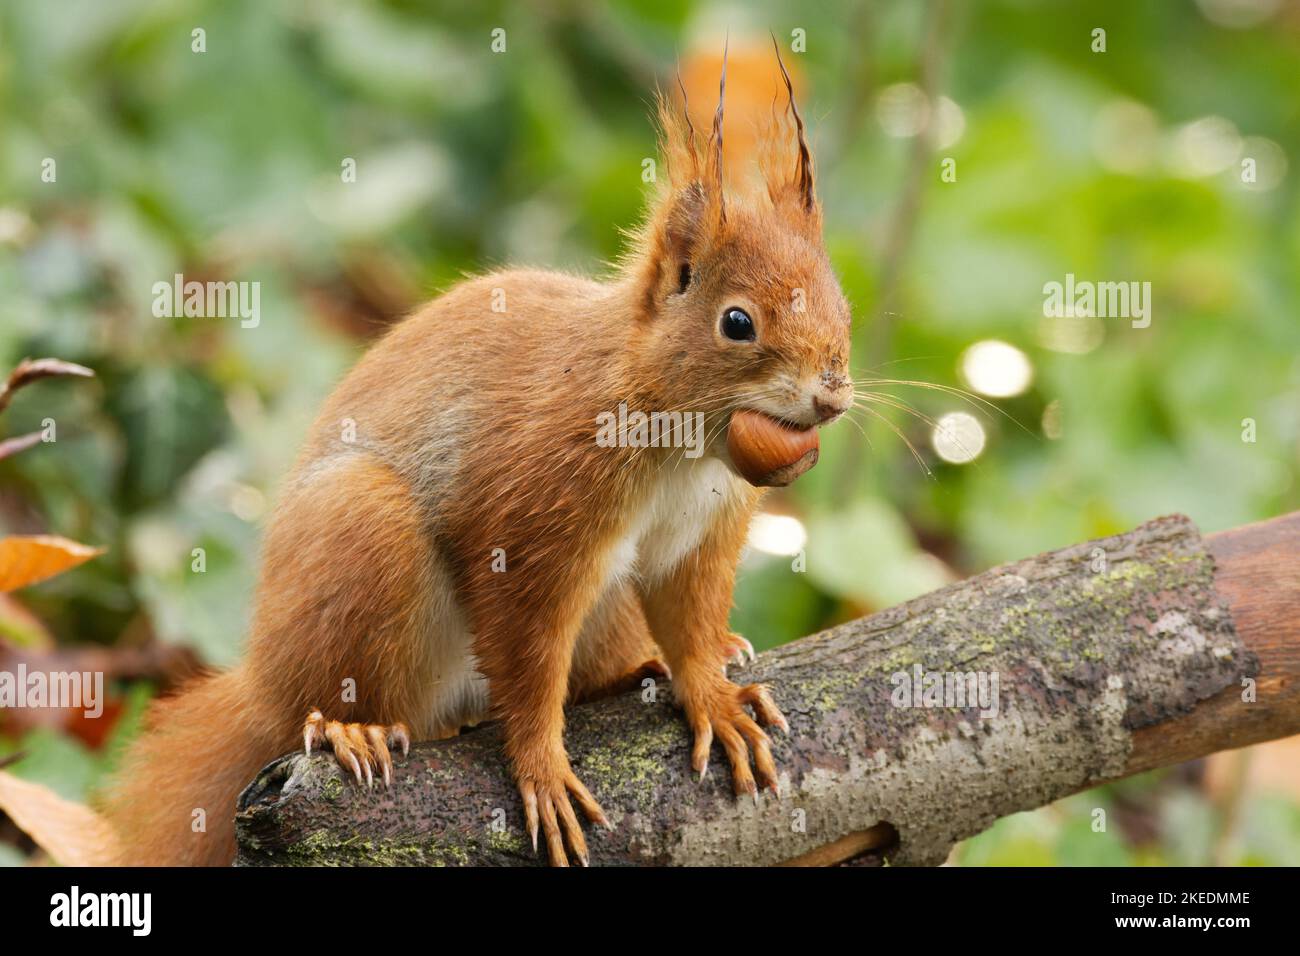 wet squirrel after a rain shower with a hazelnut in its mouth Stock Photo